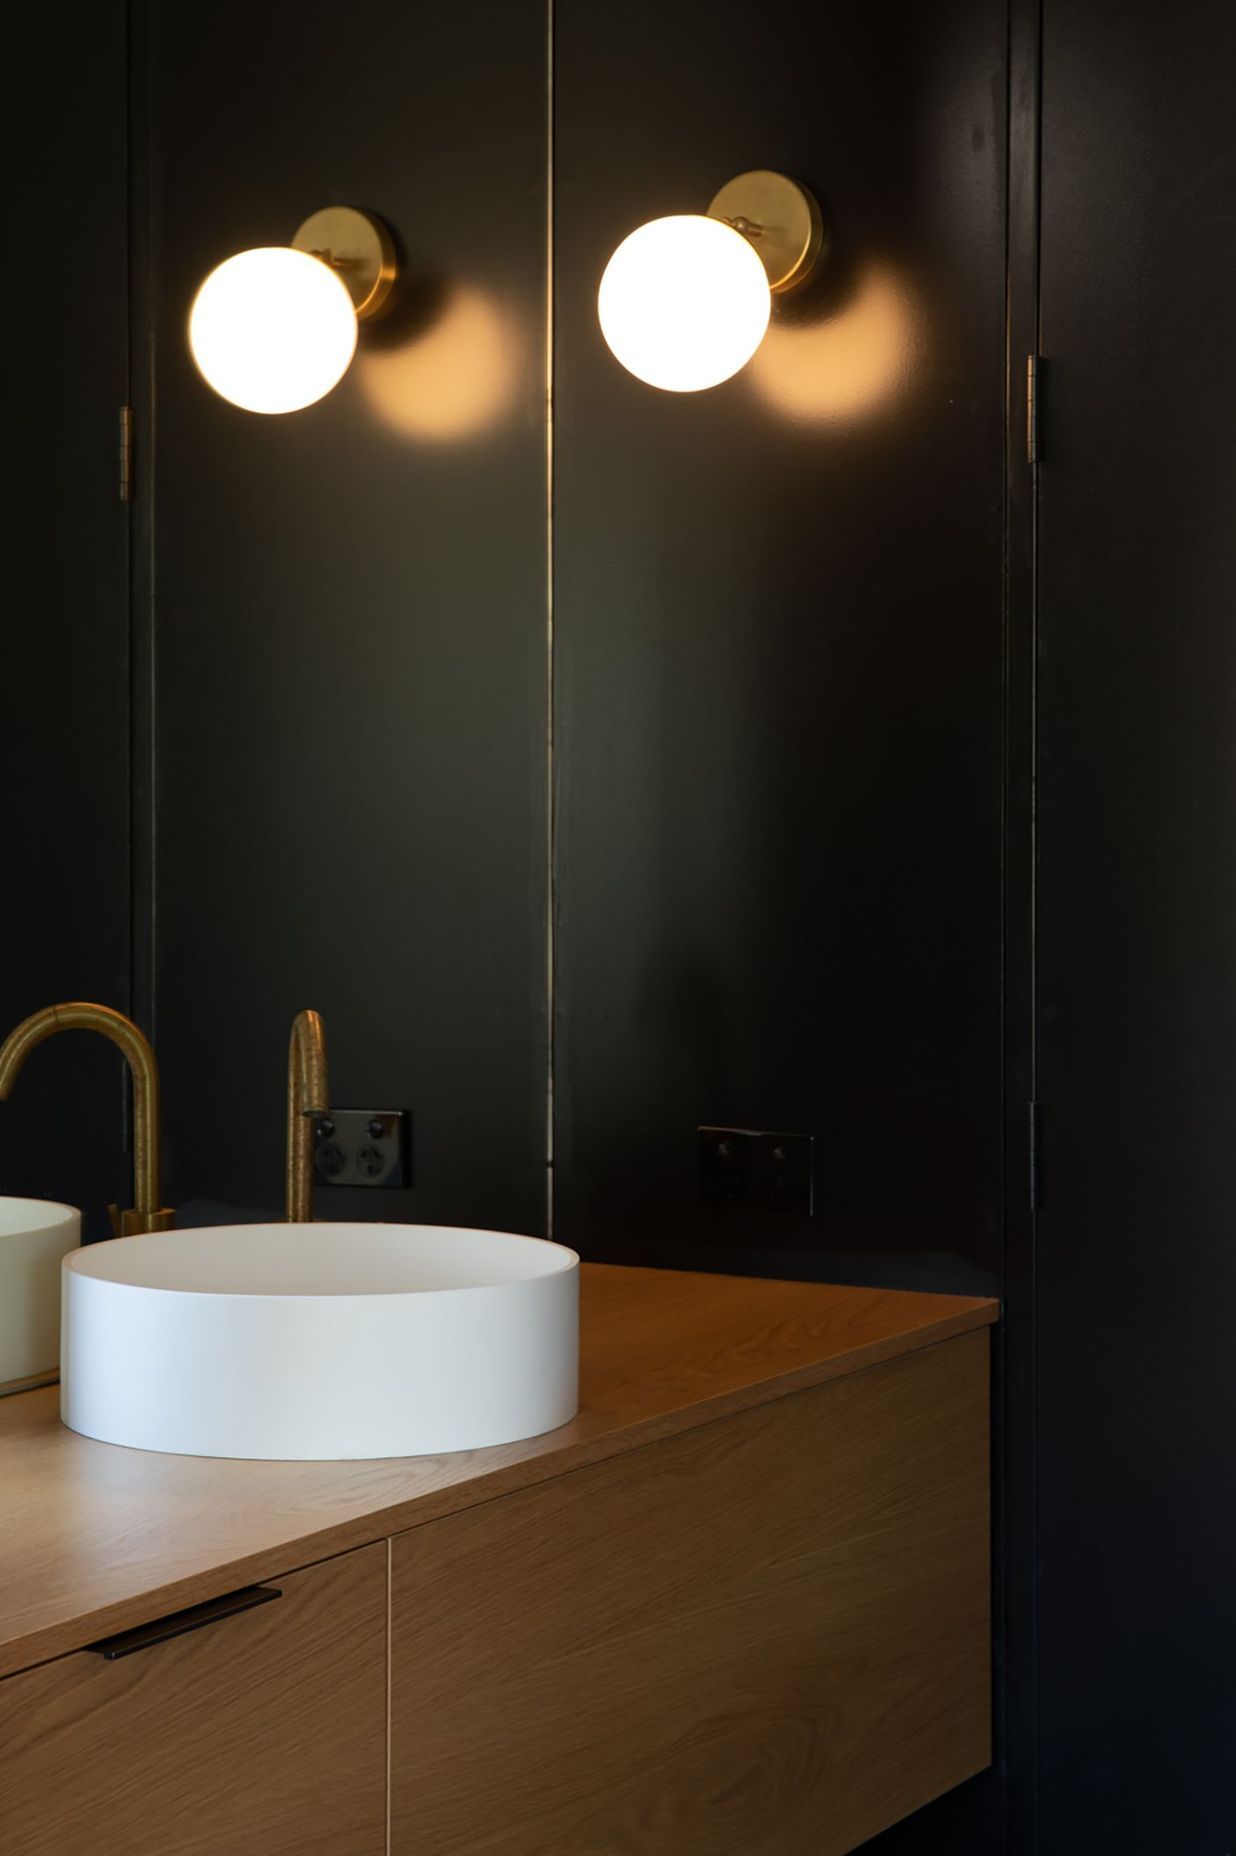 A moody bathroom utilises natural materials and feature lighting.